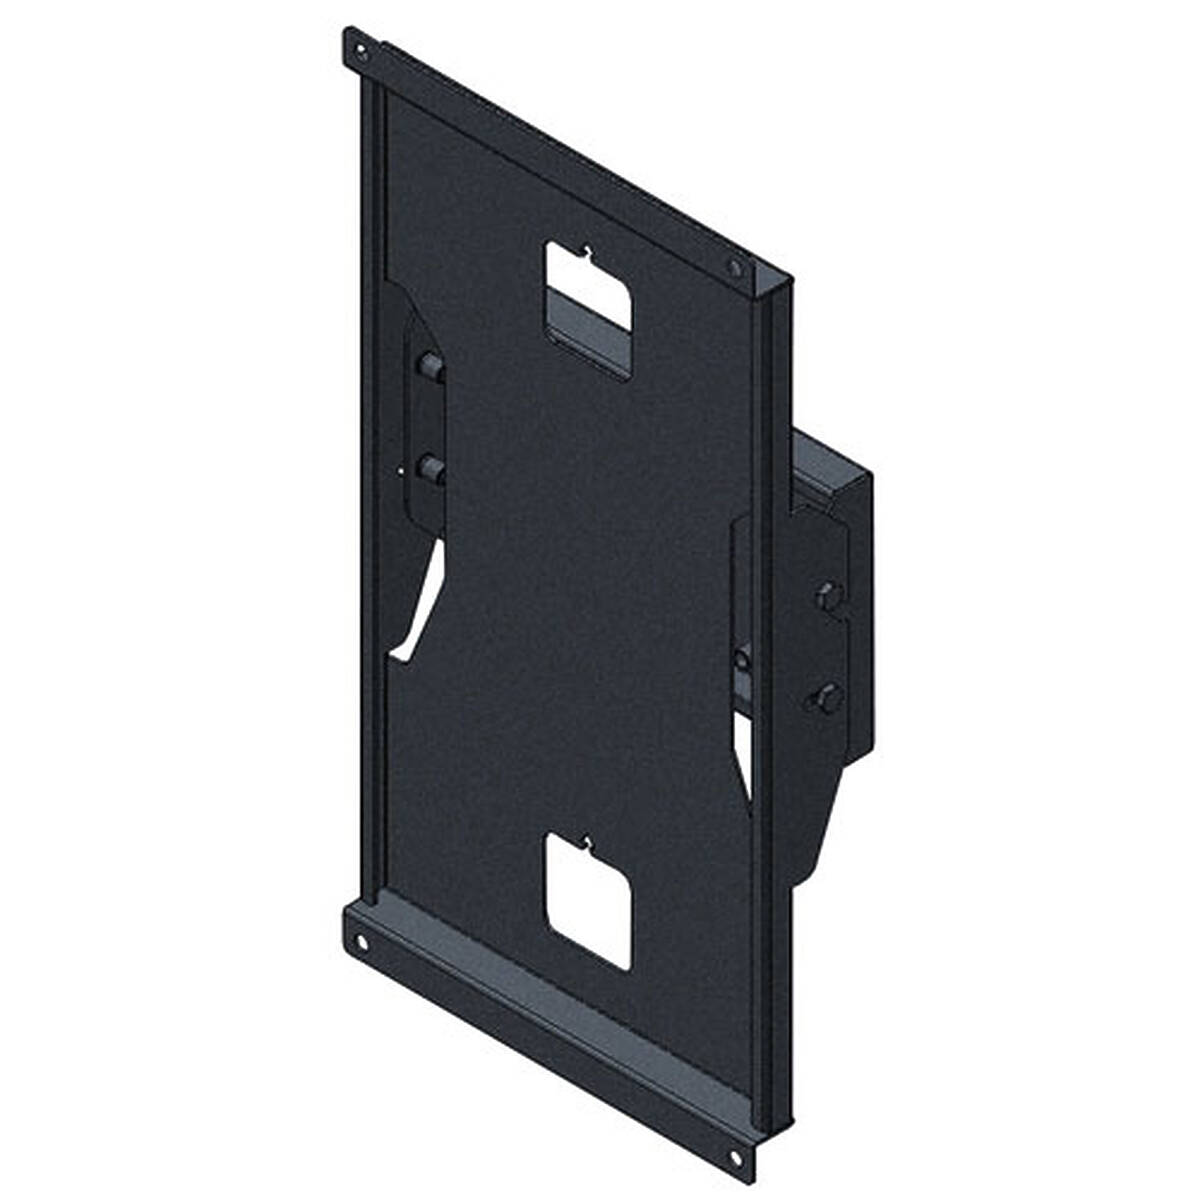 Unicol PPW1 Xactmatch Portrait bespoke tilting wall mount for monitors and TVs  from 33 to 70 inches product image. Click to enlarge.